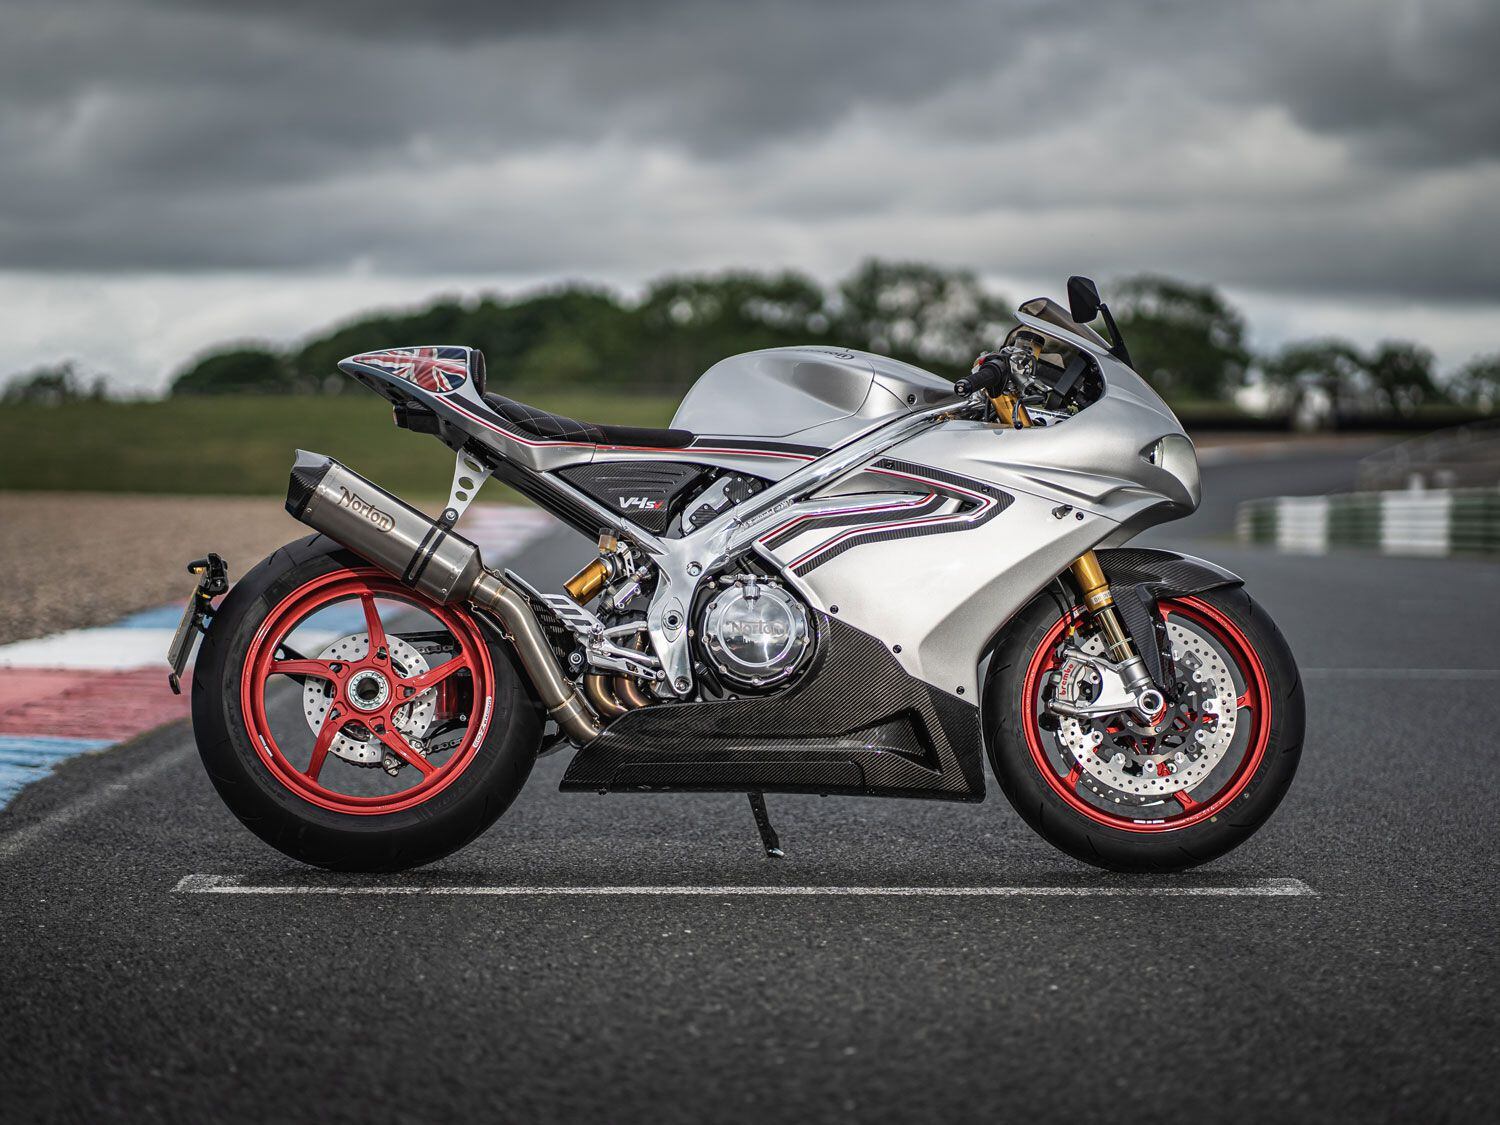 Norton is currently working on its future network plans and will be operating out of the factory in the short term.